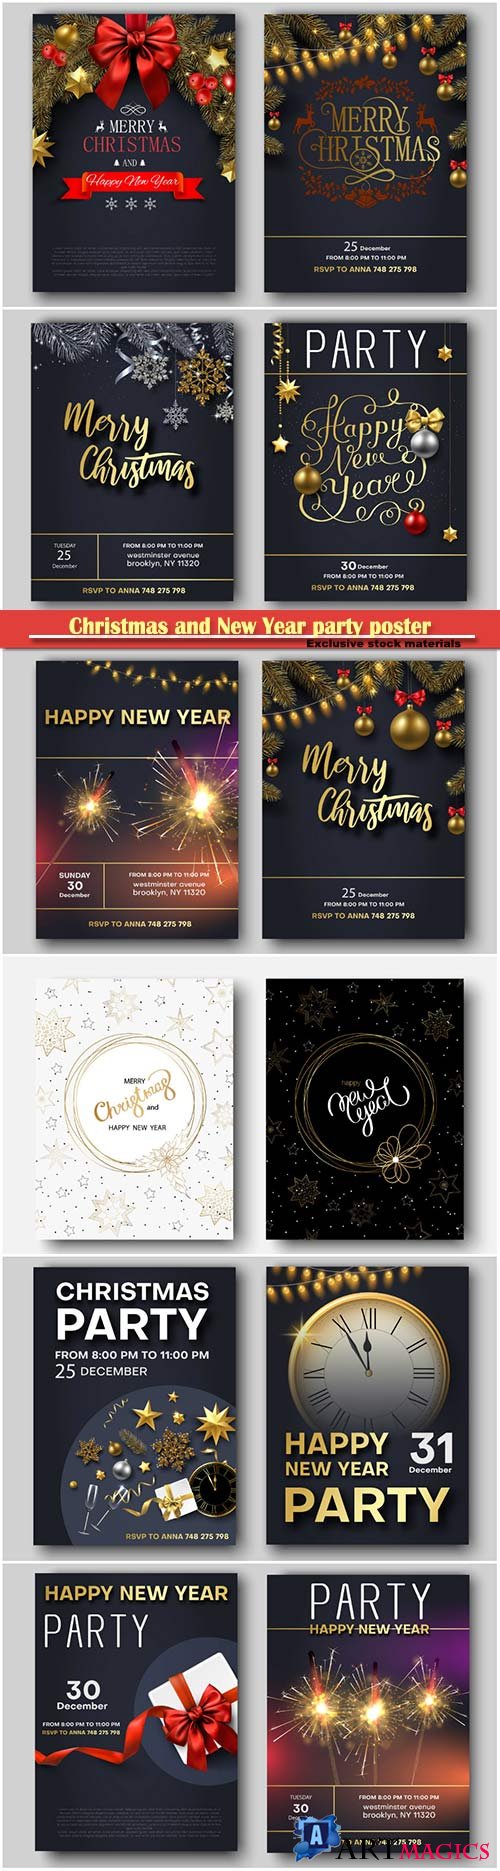 Christmas and New Year party poster or invitation vector templates